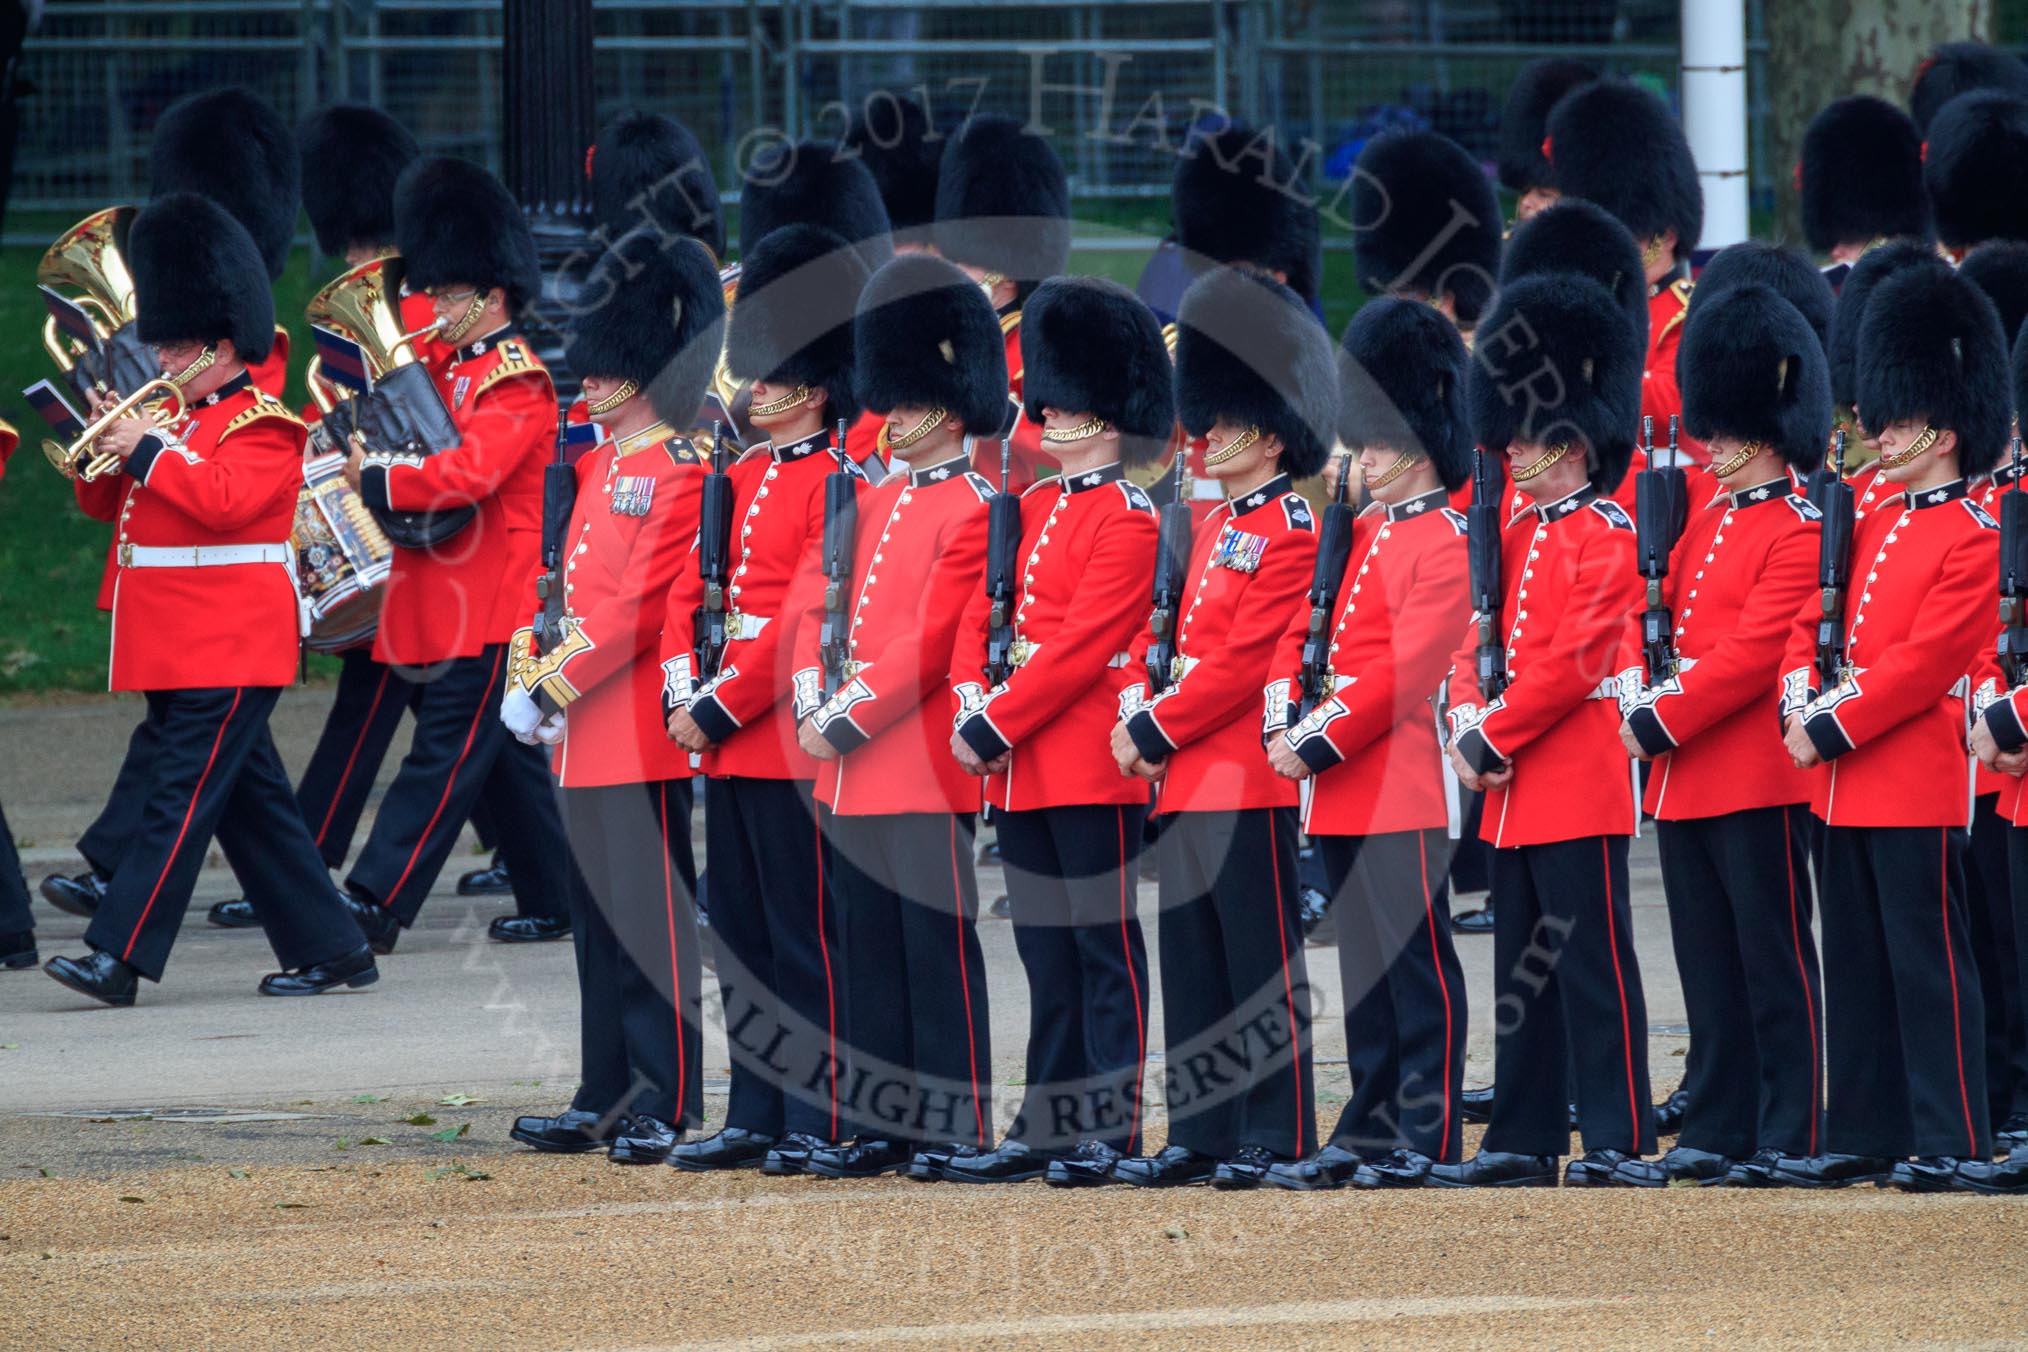 during The Colonel's Review {iptcyear4} (final rehearsal for Trooping the Colour, The Queen's Birthday Parade)  at Horse Guards Parade, Westminster, London, 2 June 2018, 10:31.